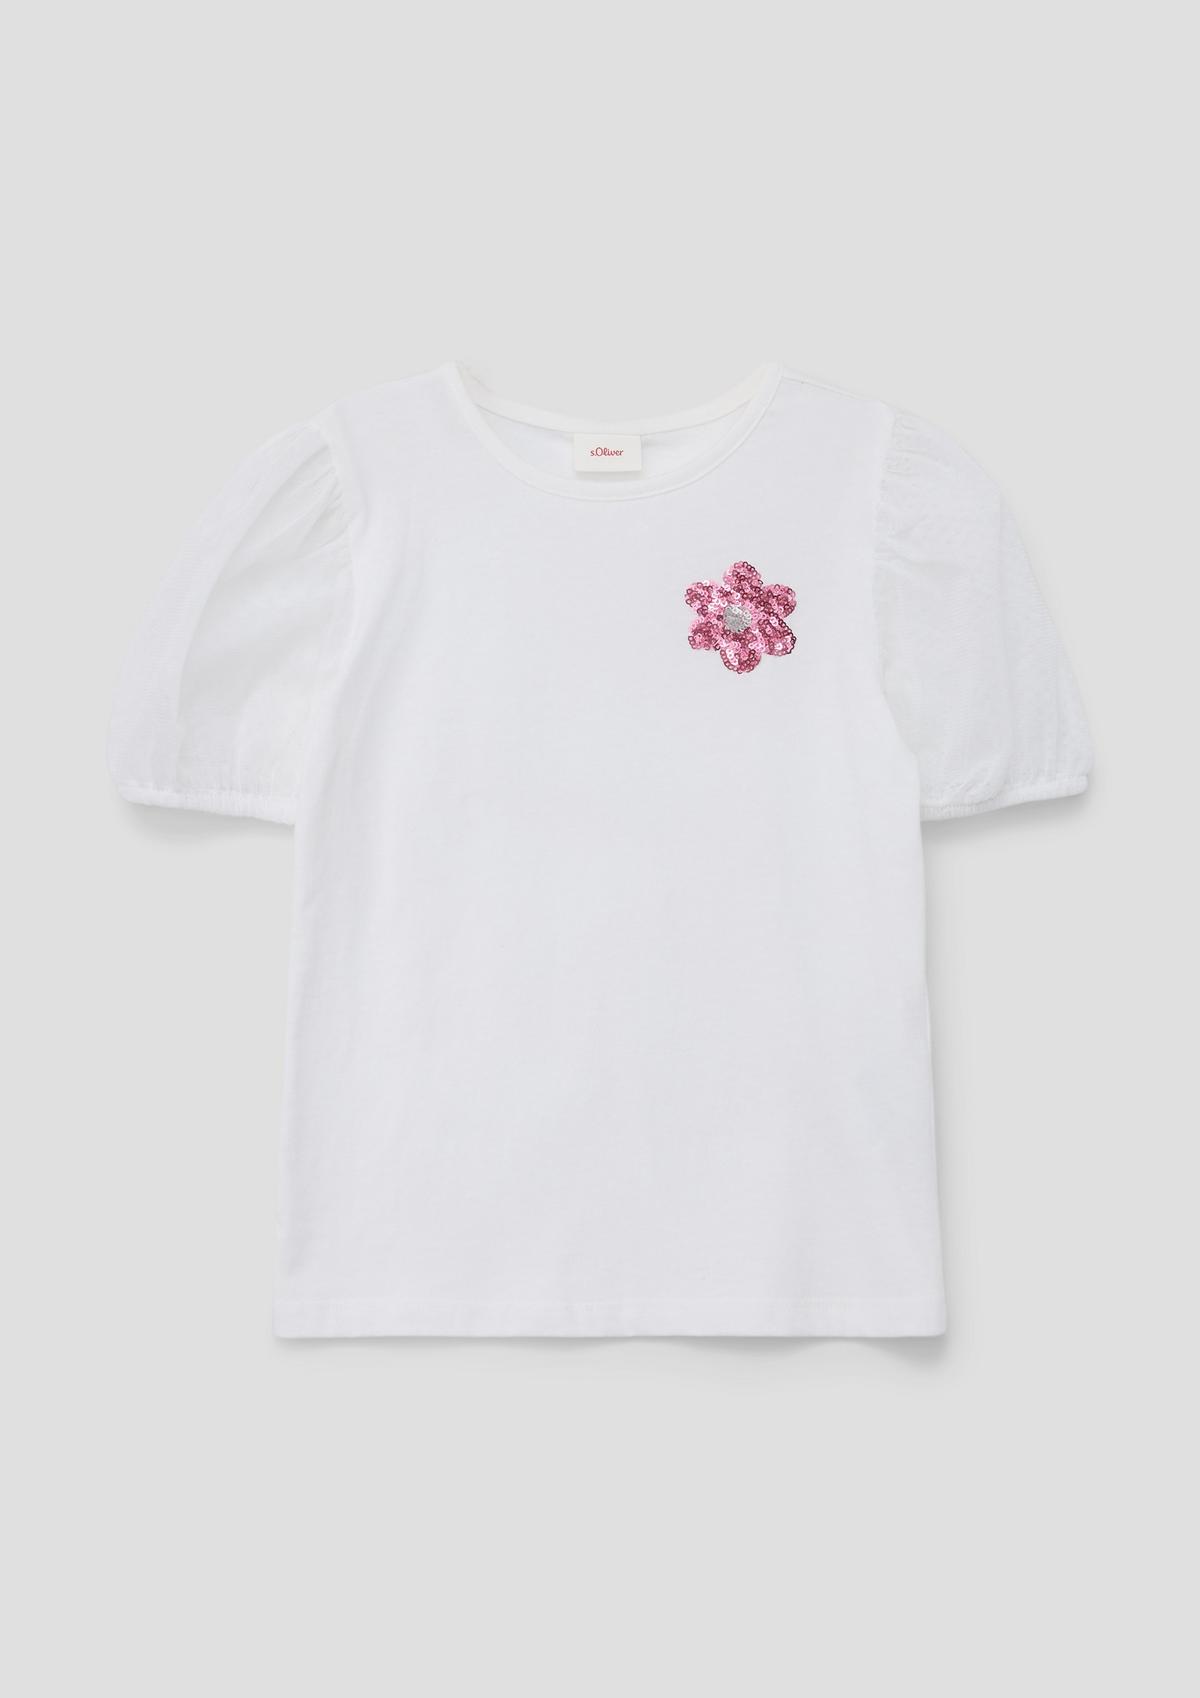 Shop clothing for girls online | T-Shirts